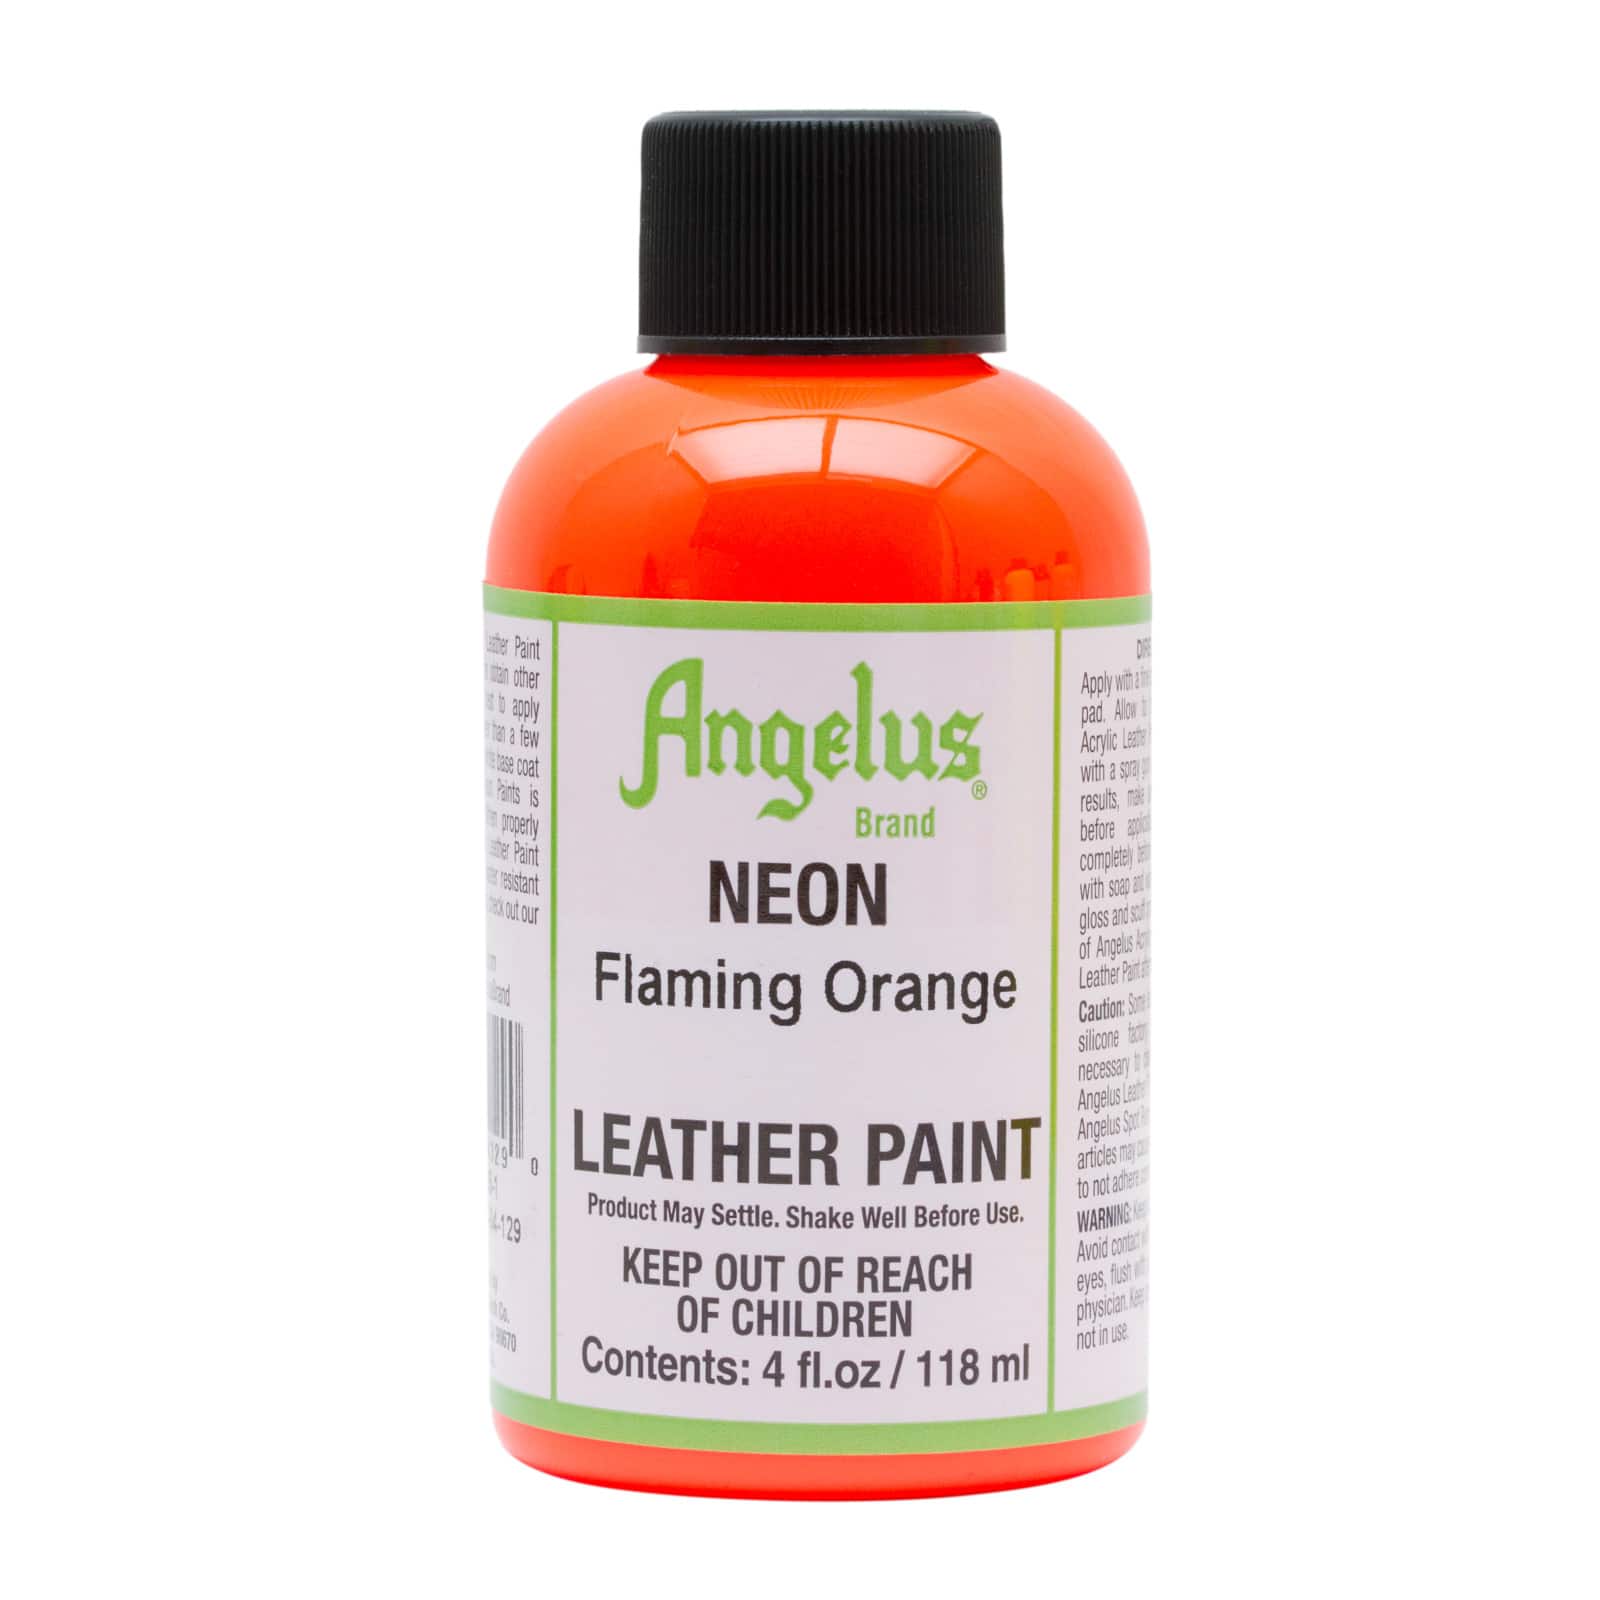 Angelus Neon Acrylic Leather Paint for Shoes, Sneakers, Bags, 12